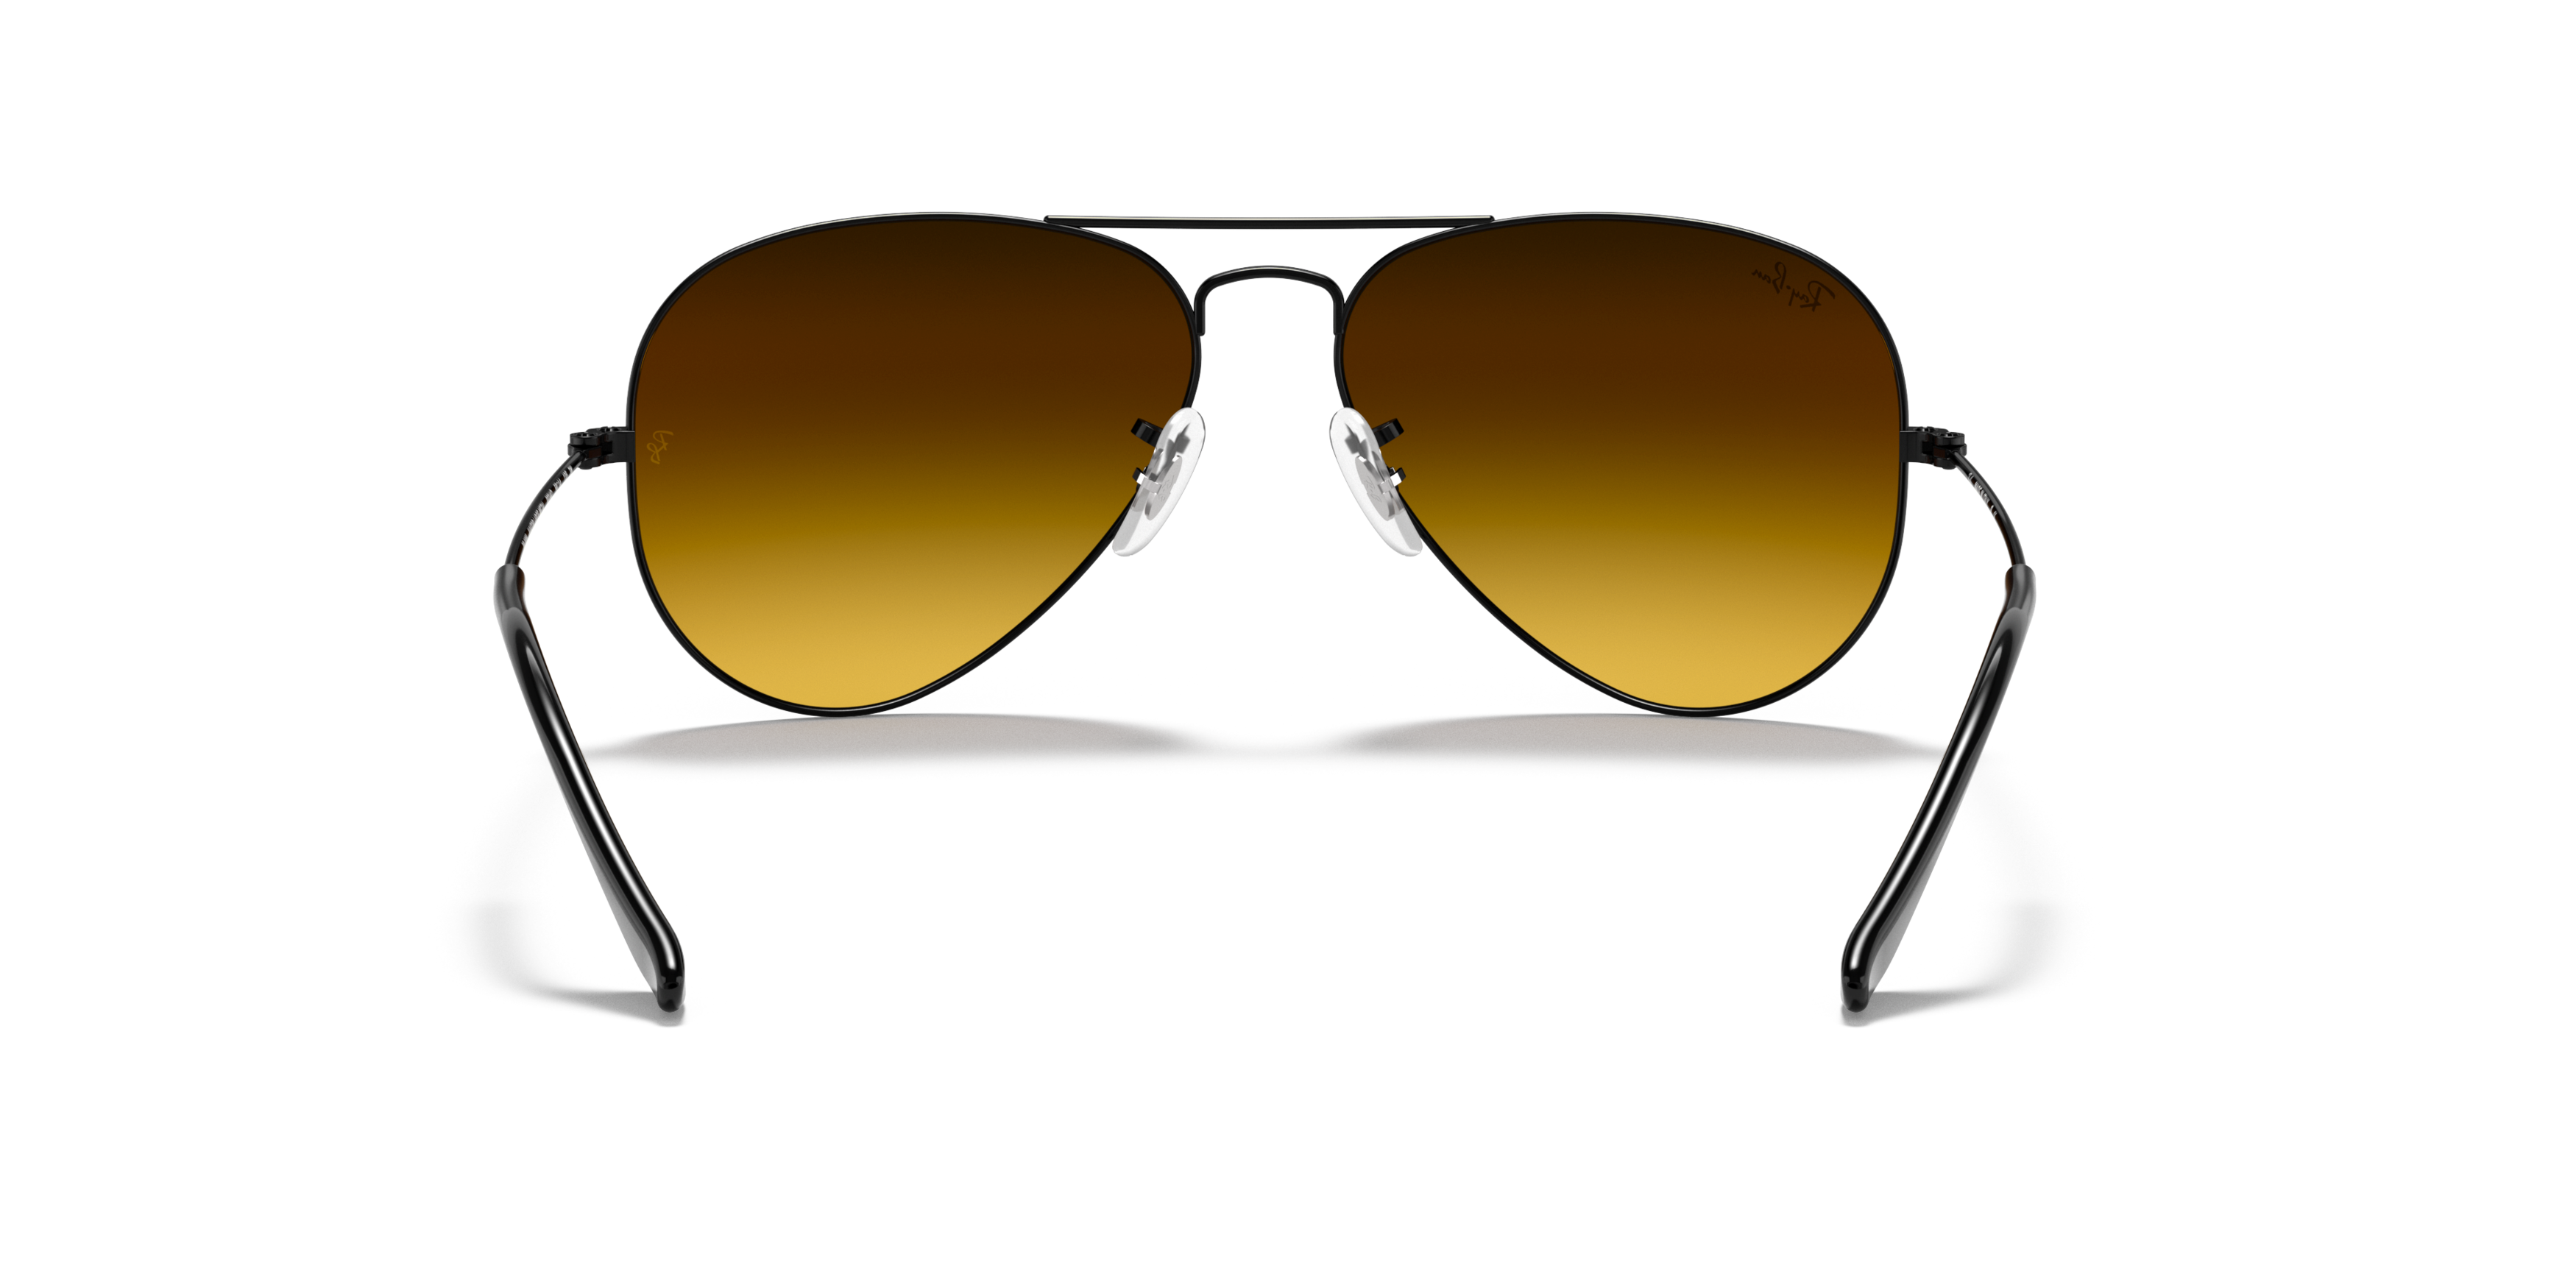 [products.image.detail02] Ray-Ban Aviator Large Metal RB3025 002/4O